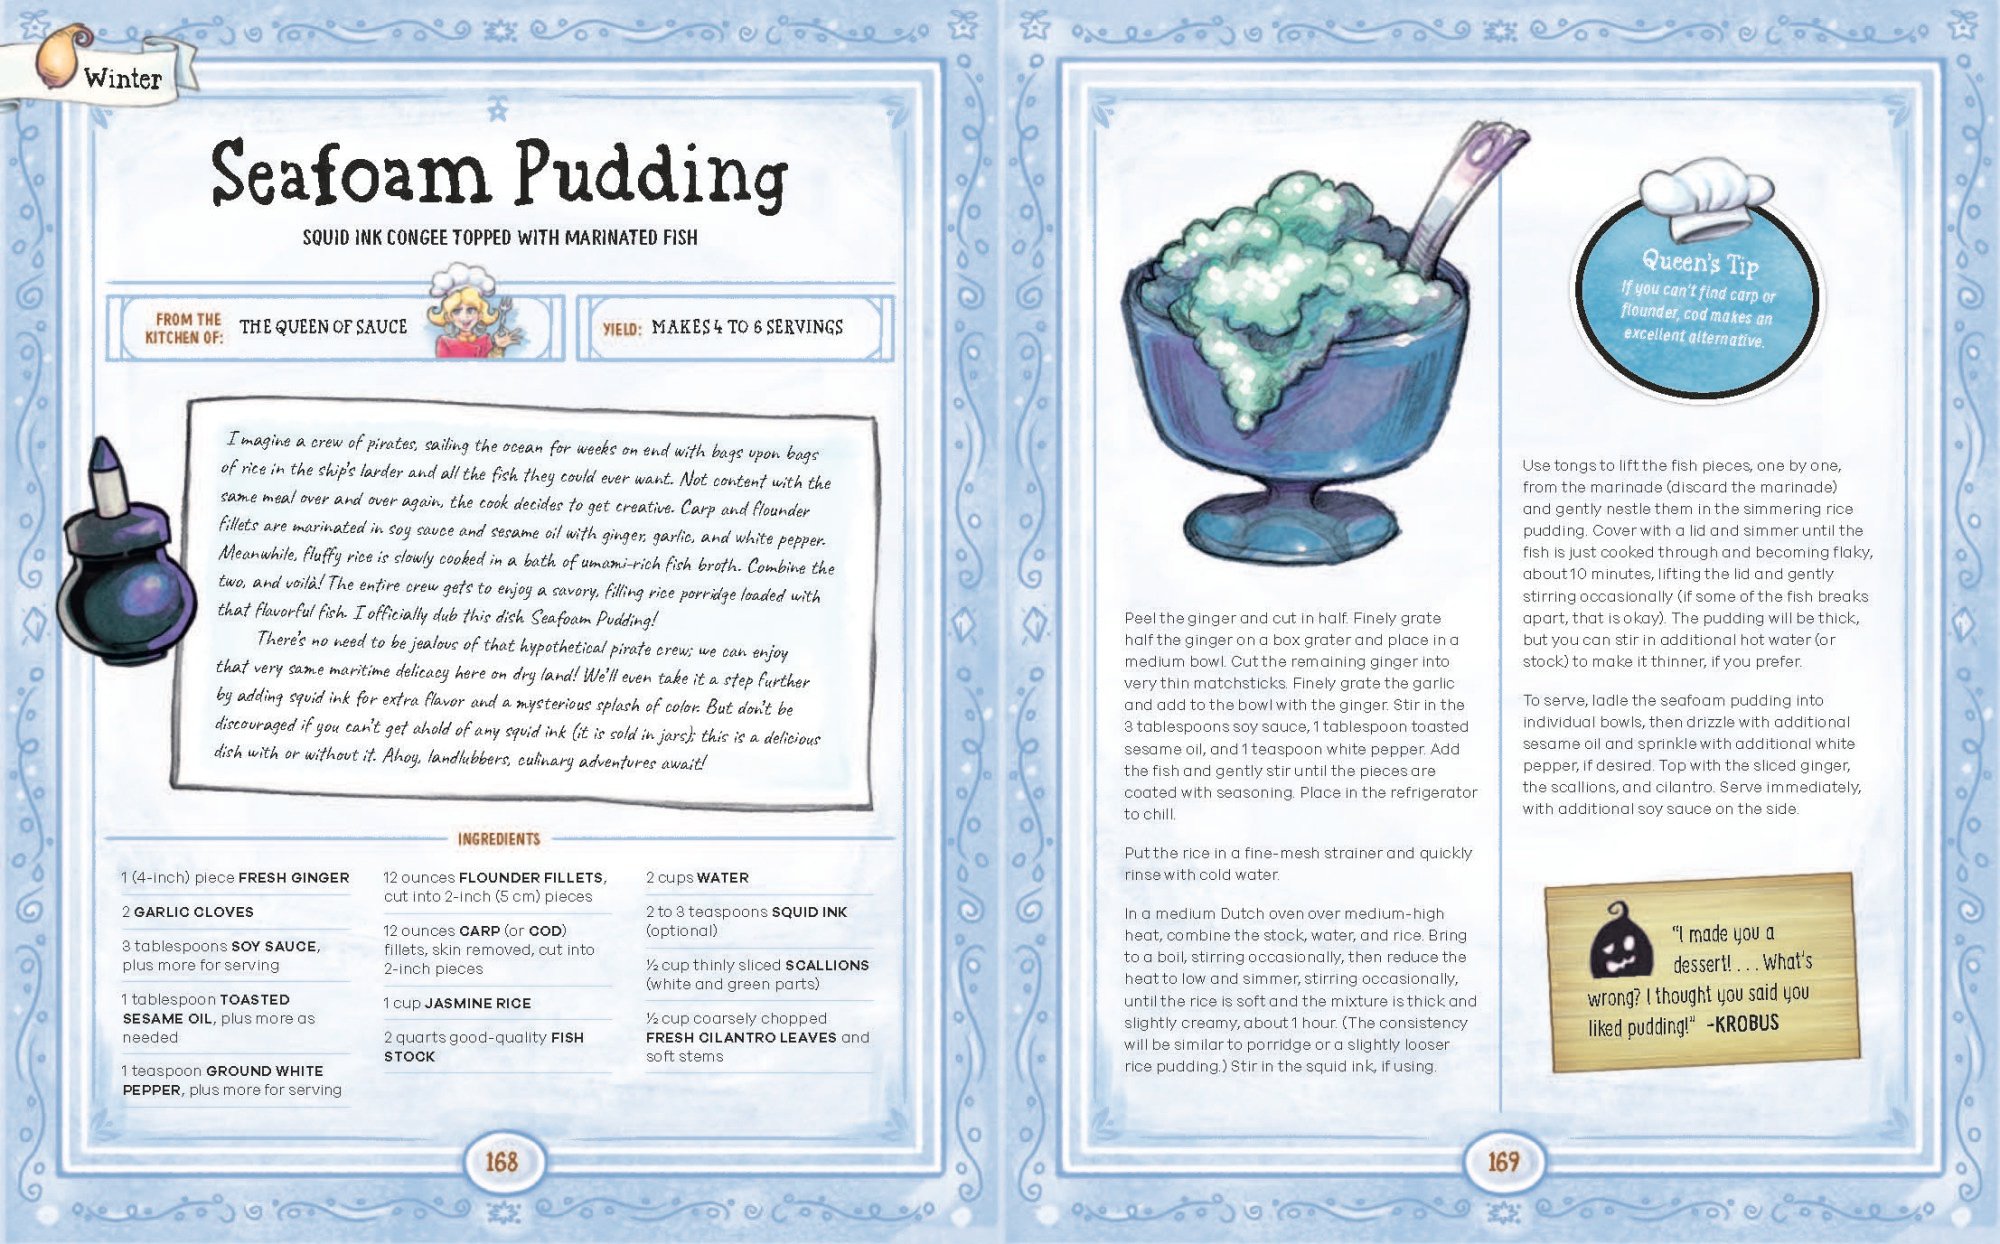 The recipe for Seafoam Pudding in The Official Stardew Valley Cookbook.